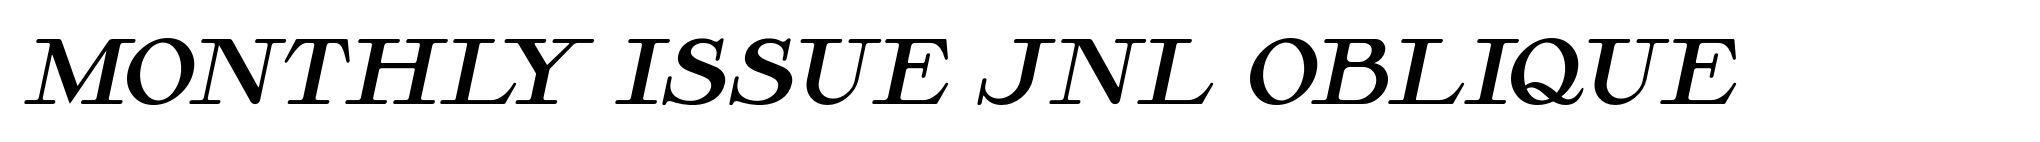 Monthly Issue JNL Oblique image